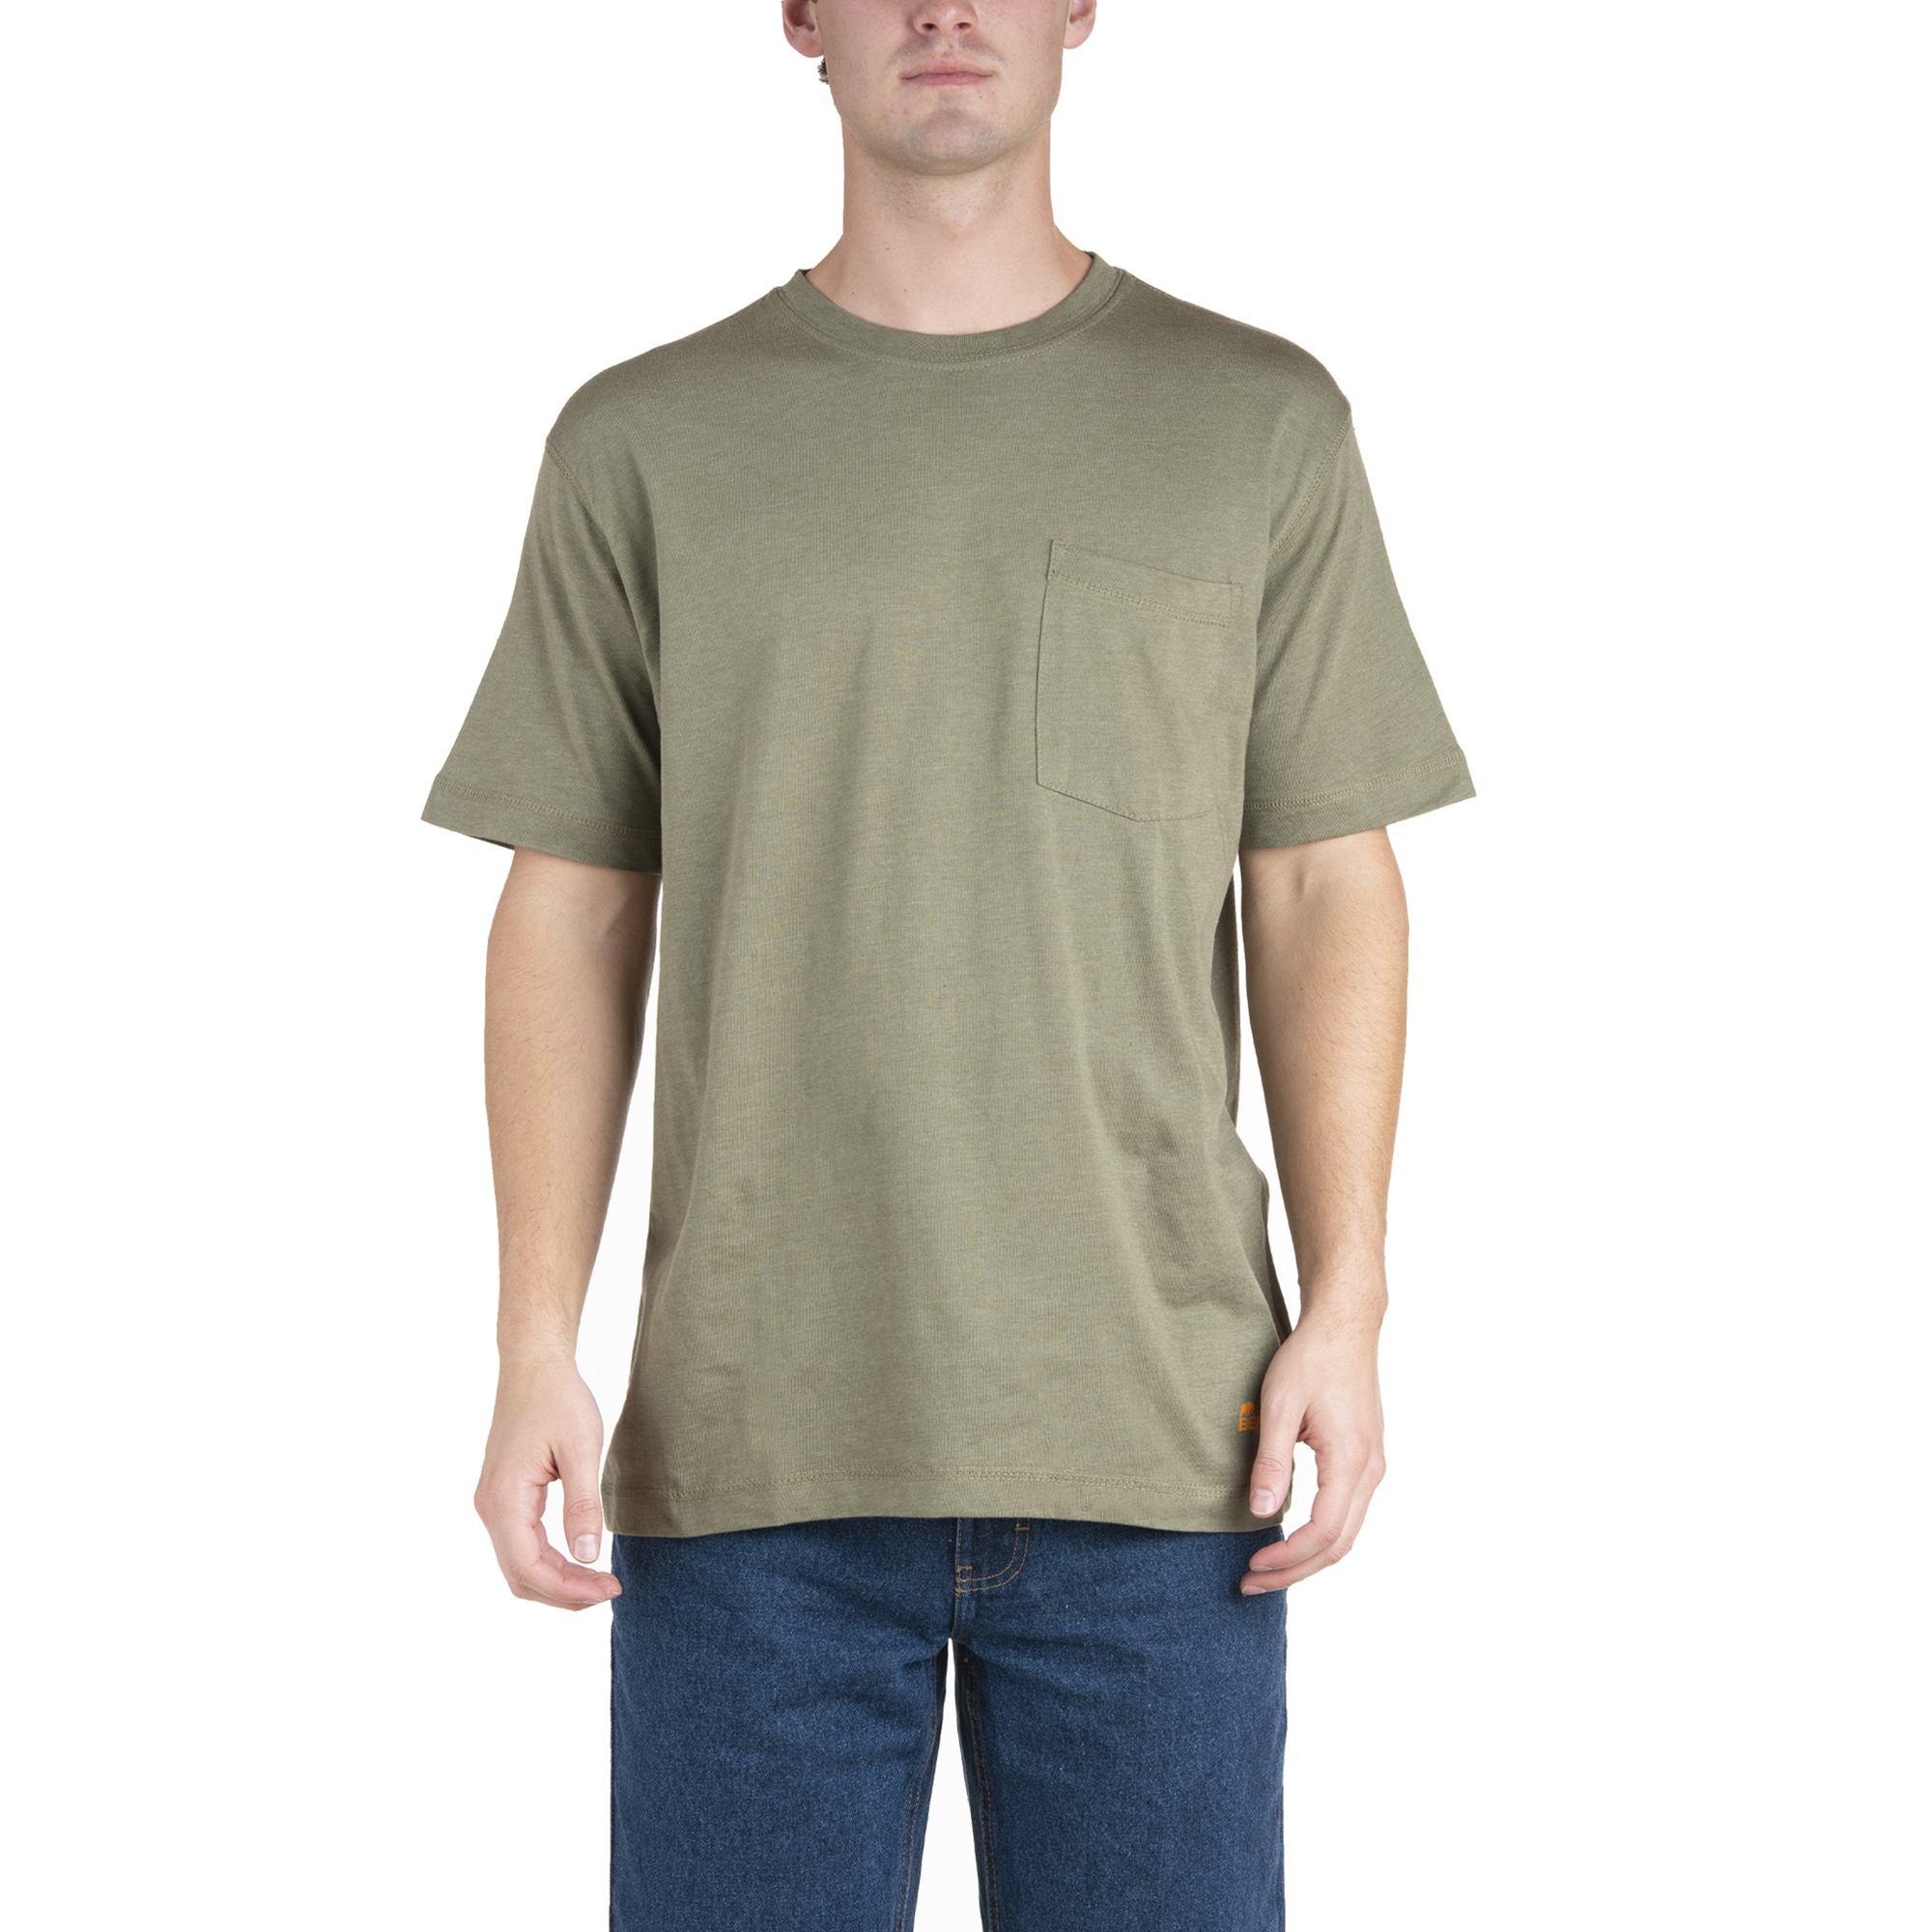 Berne Apparel, Lightweight Performance Tee-Style, Size 2XL, Color Lichen (Heathered), Material 60% Cotton 40% Polyester, Model BSM38